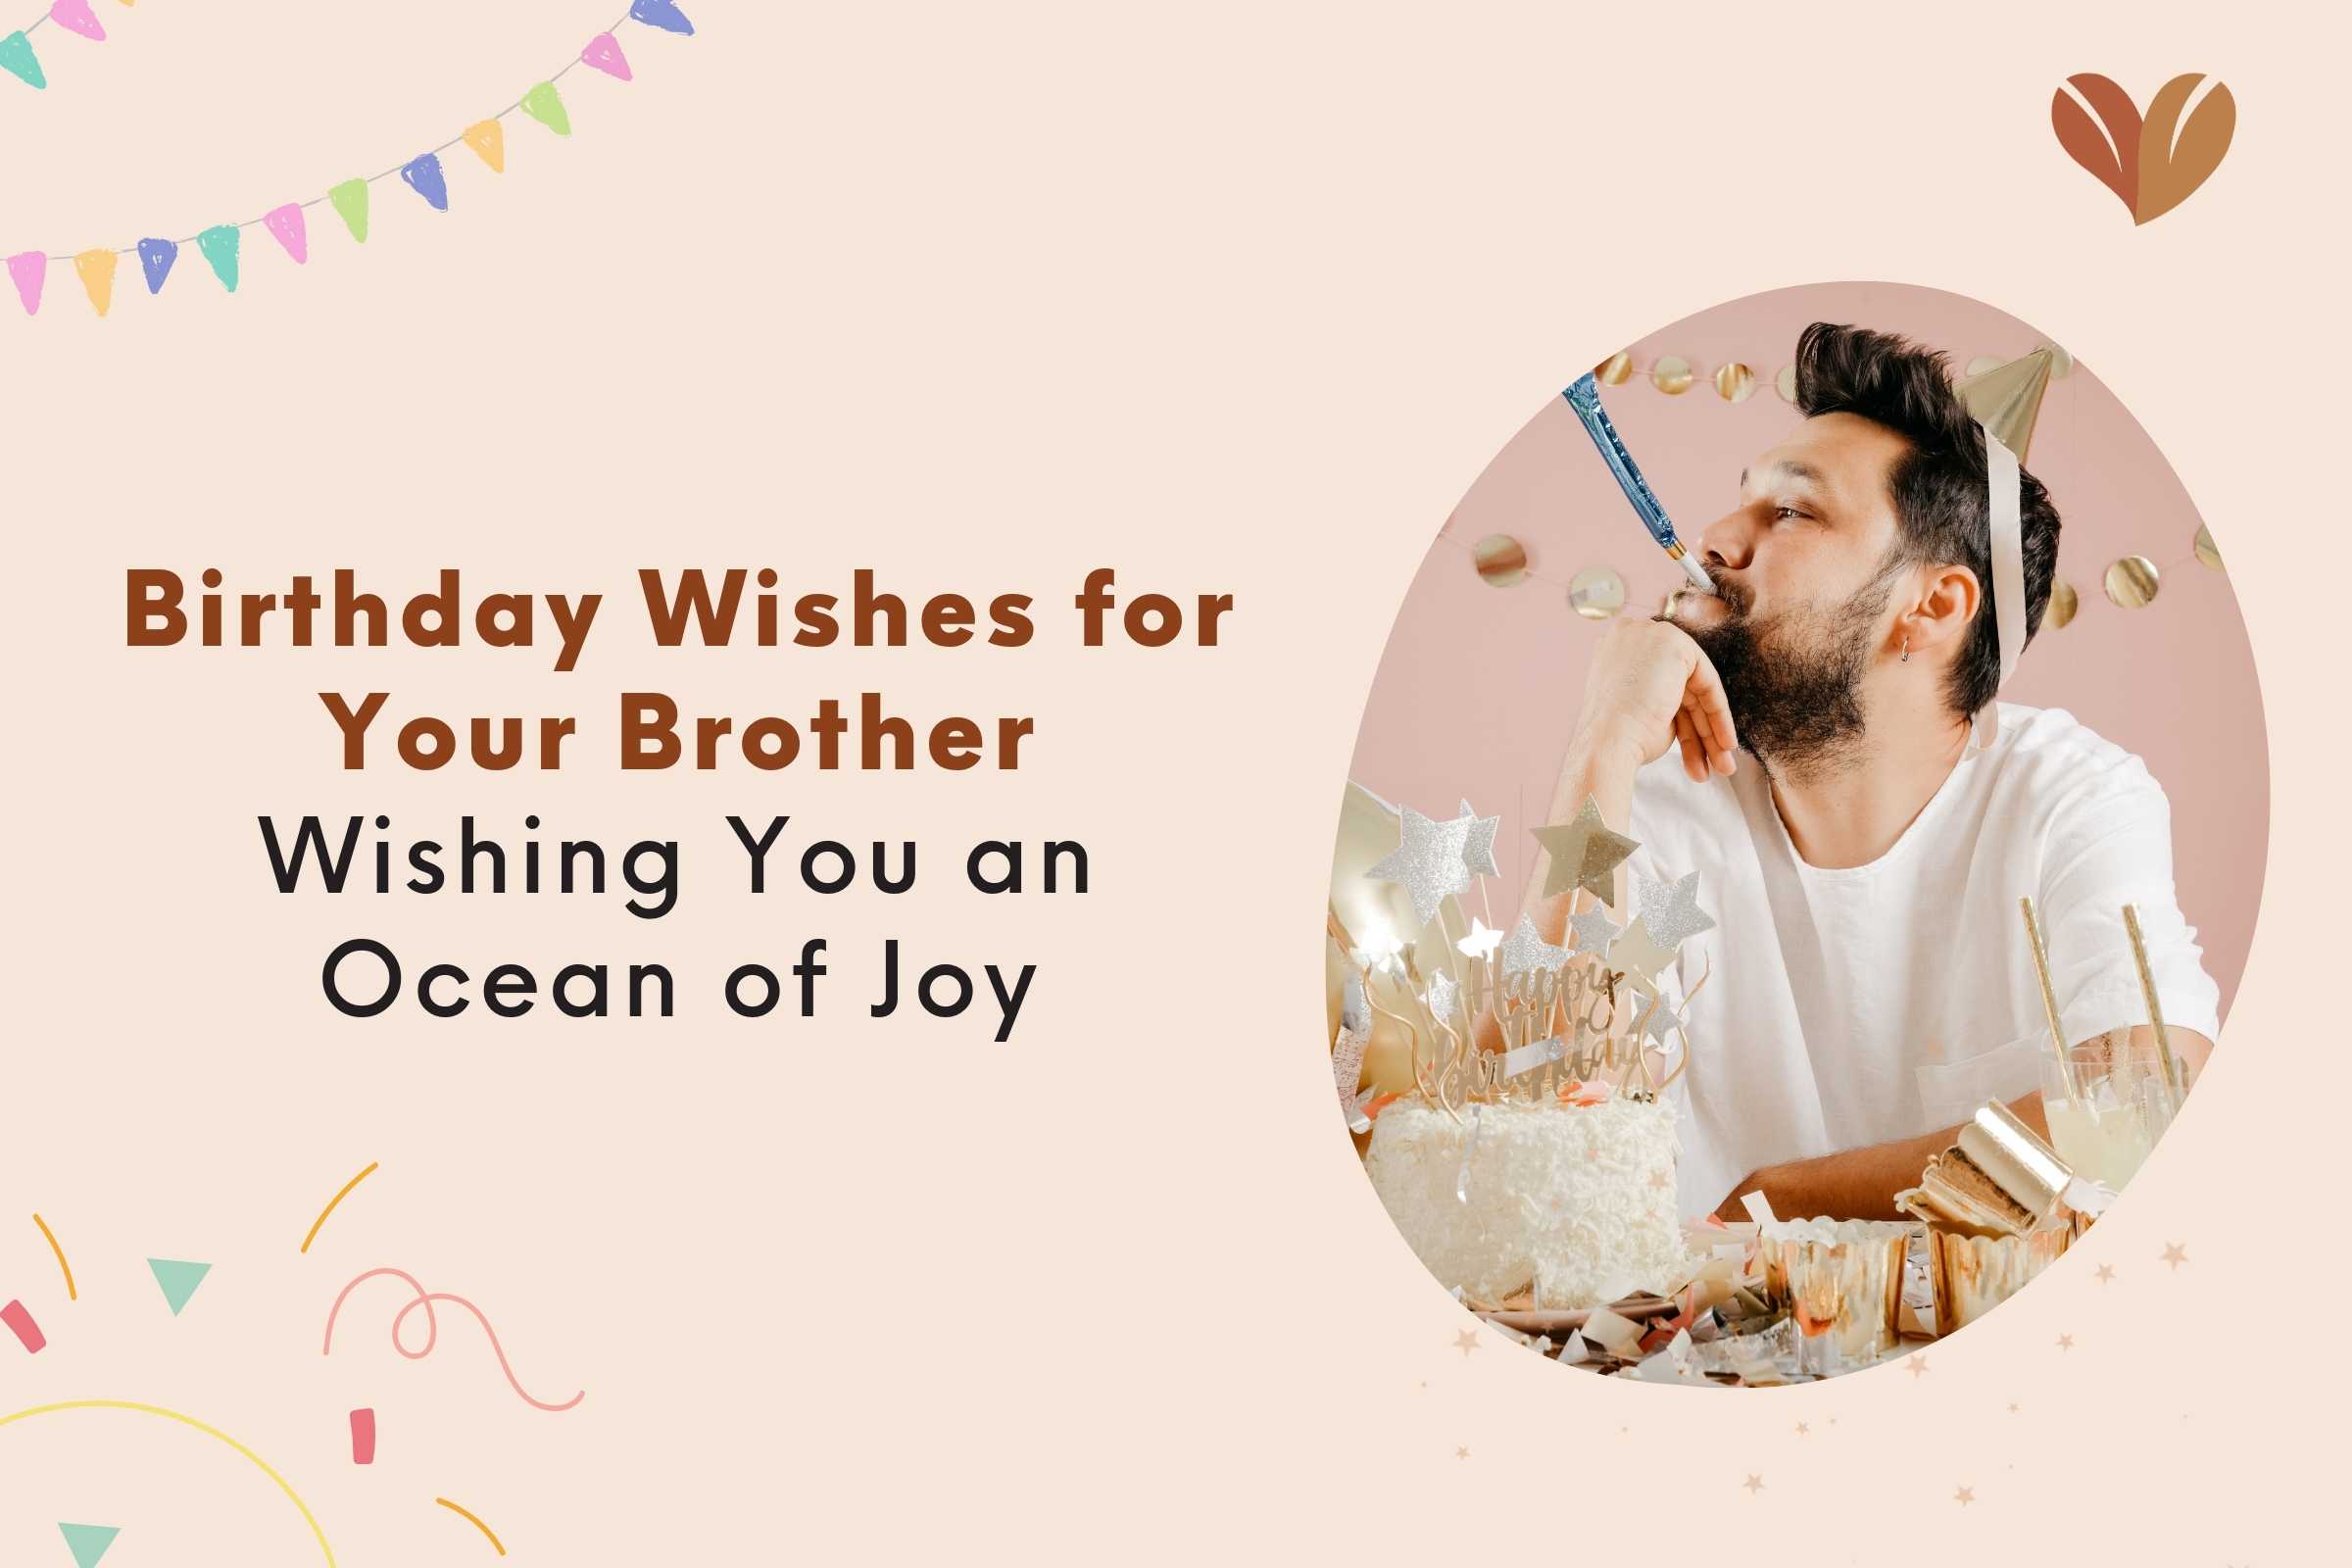 A heartwarming gathering with 'happy birthday big brother' wishes bringing smiles and joy.